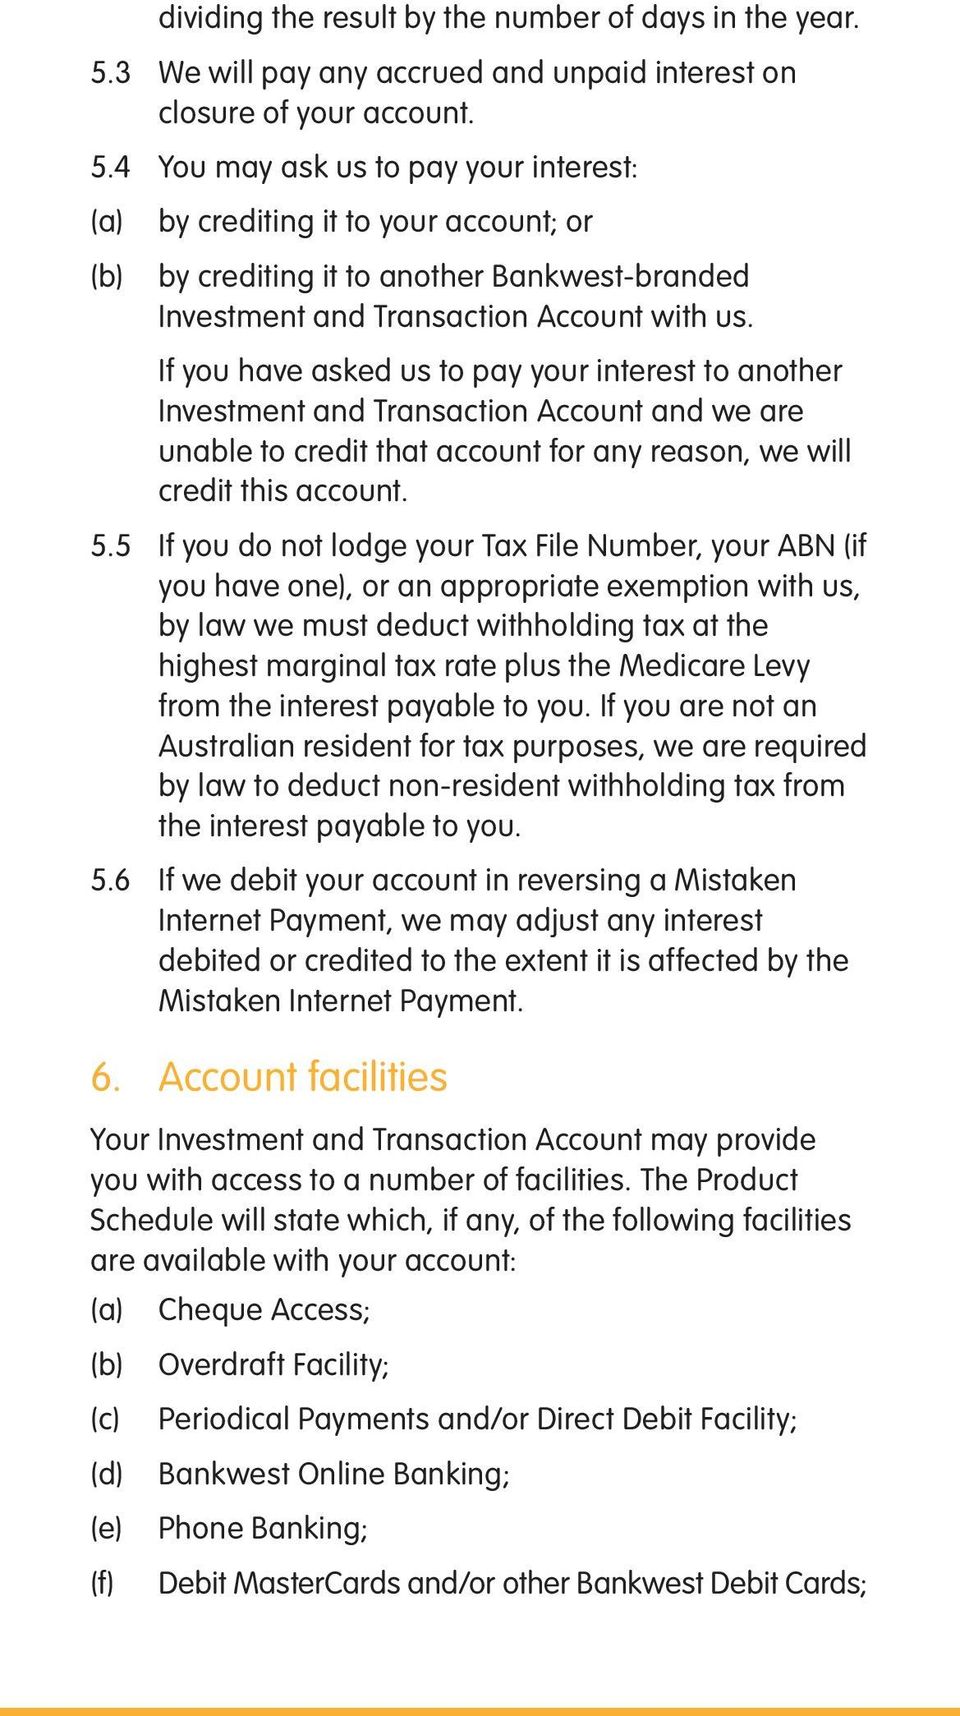 4 You may ask us to pay your interest: (a) (b) by crediting it to your account; or by crediting it to another Bankwest-branded Investment and Transaction Account with us.